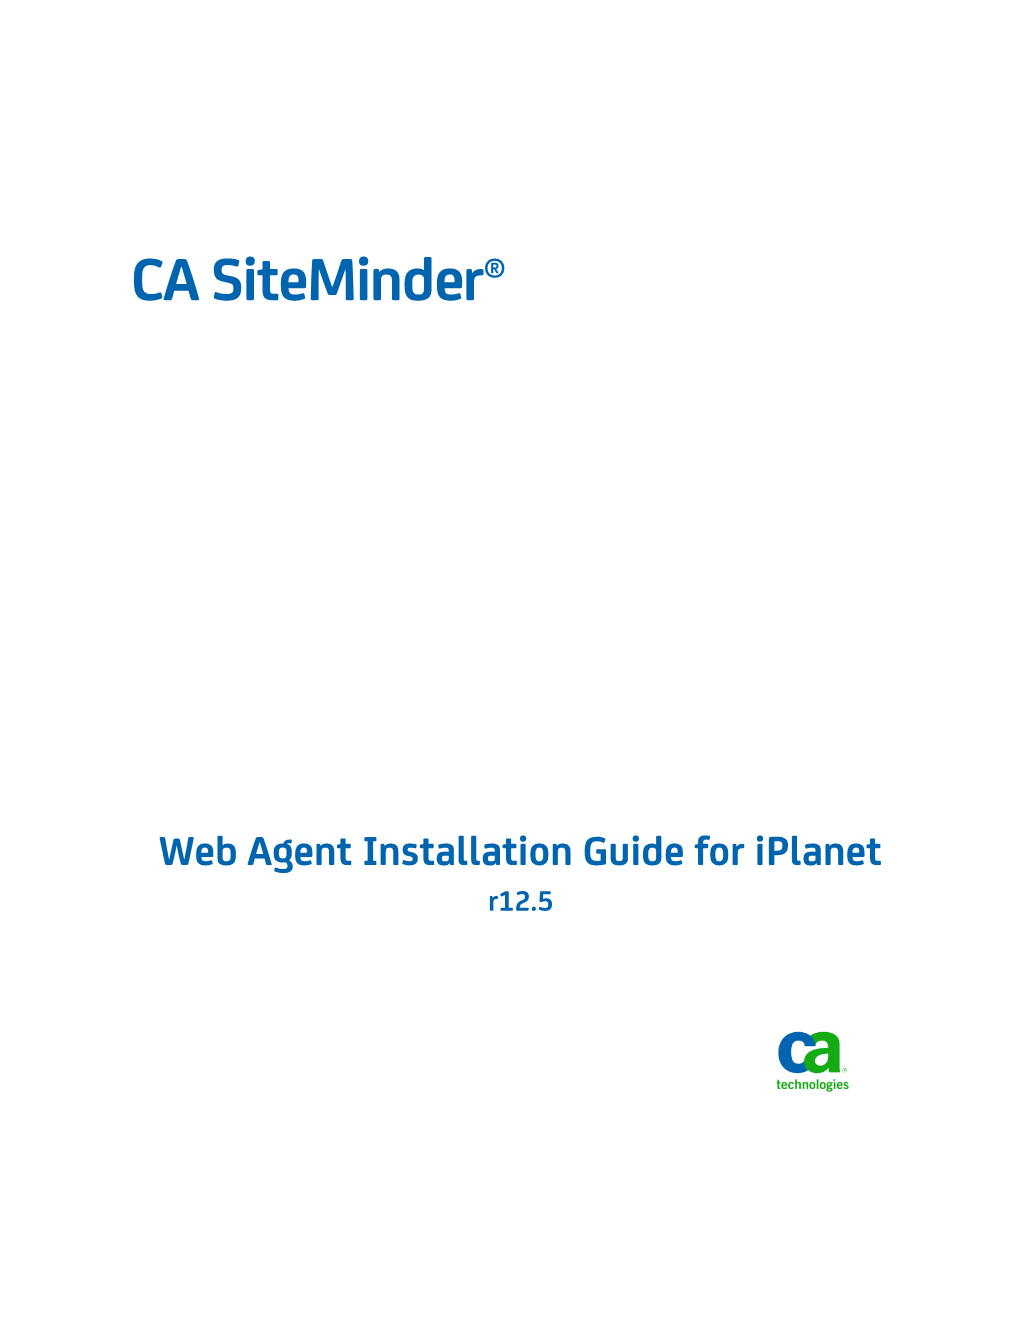 CA Siteminder Web Agent Installation Guide for Iplanet